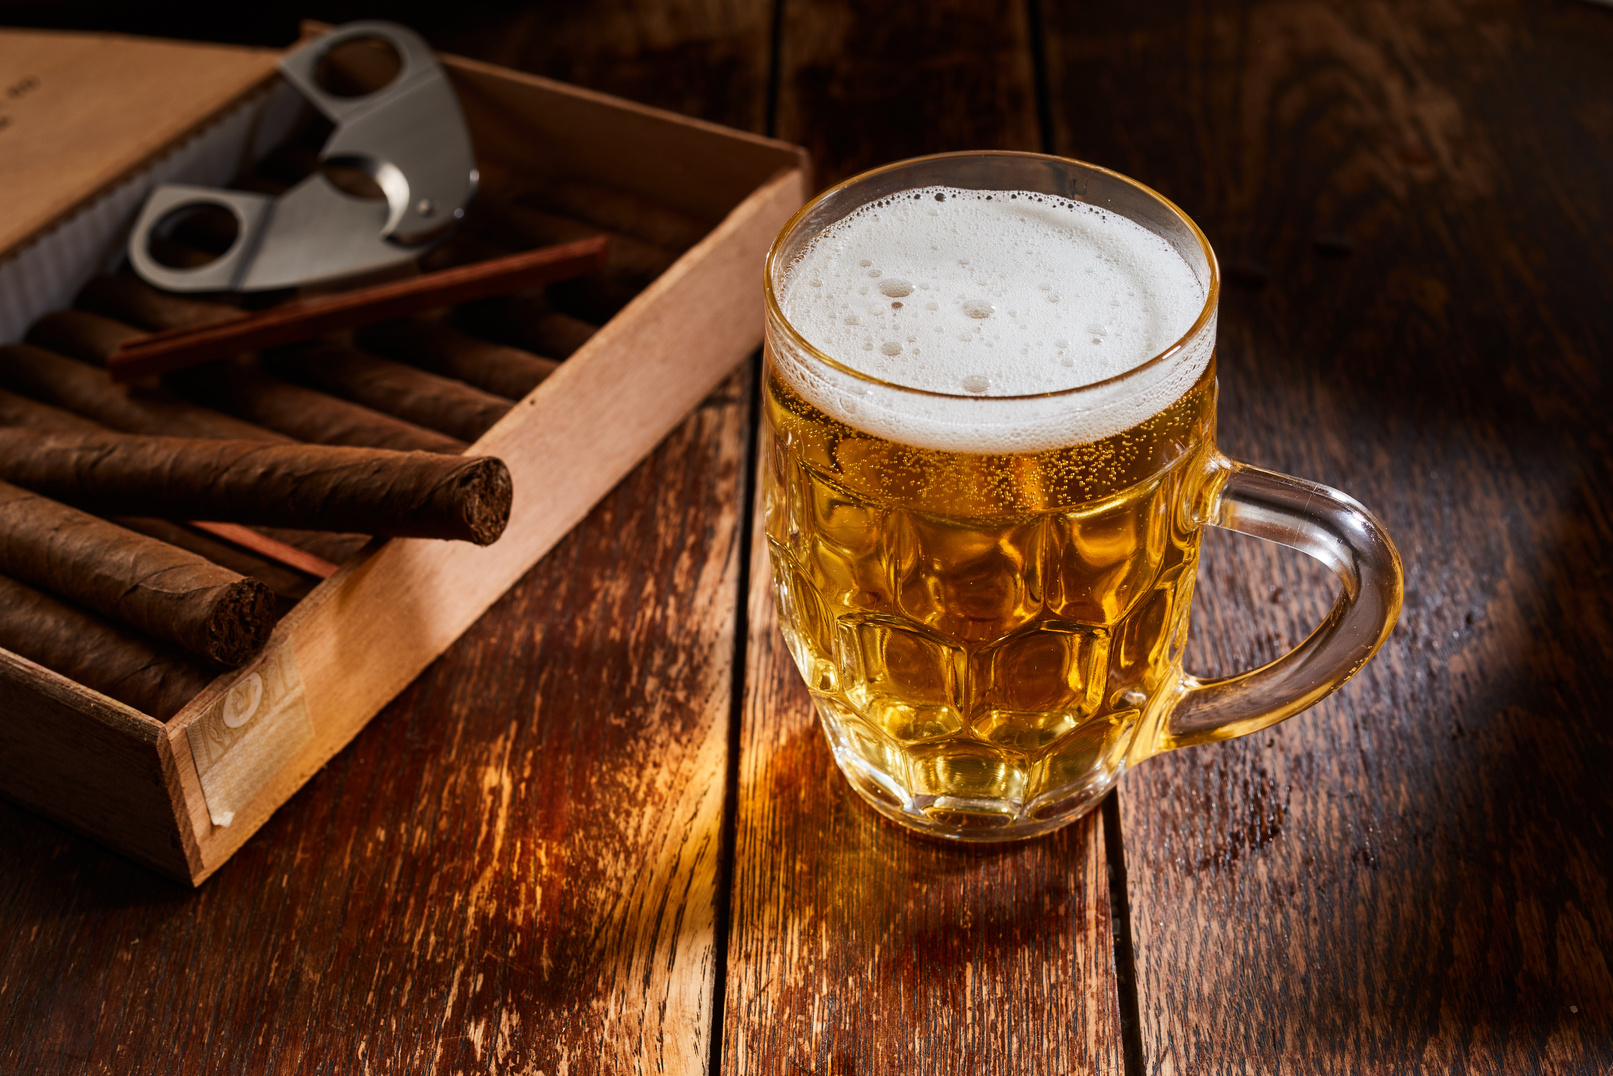 Beer in glass on wooden table with cigars